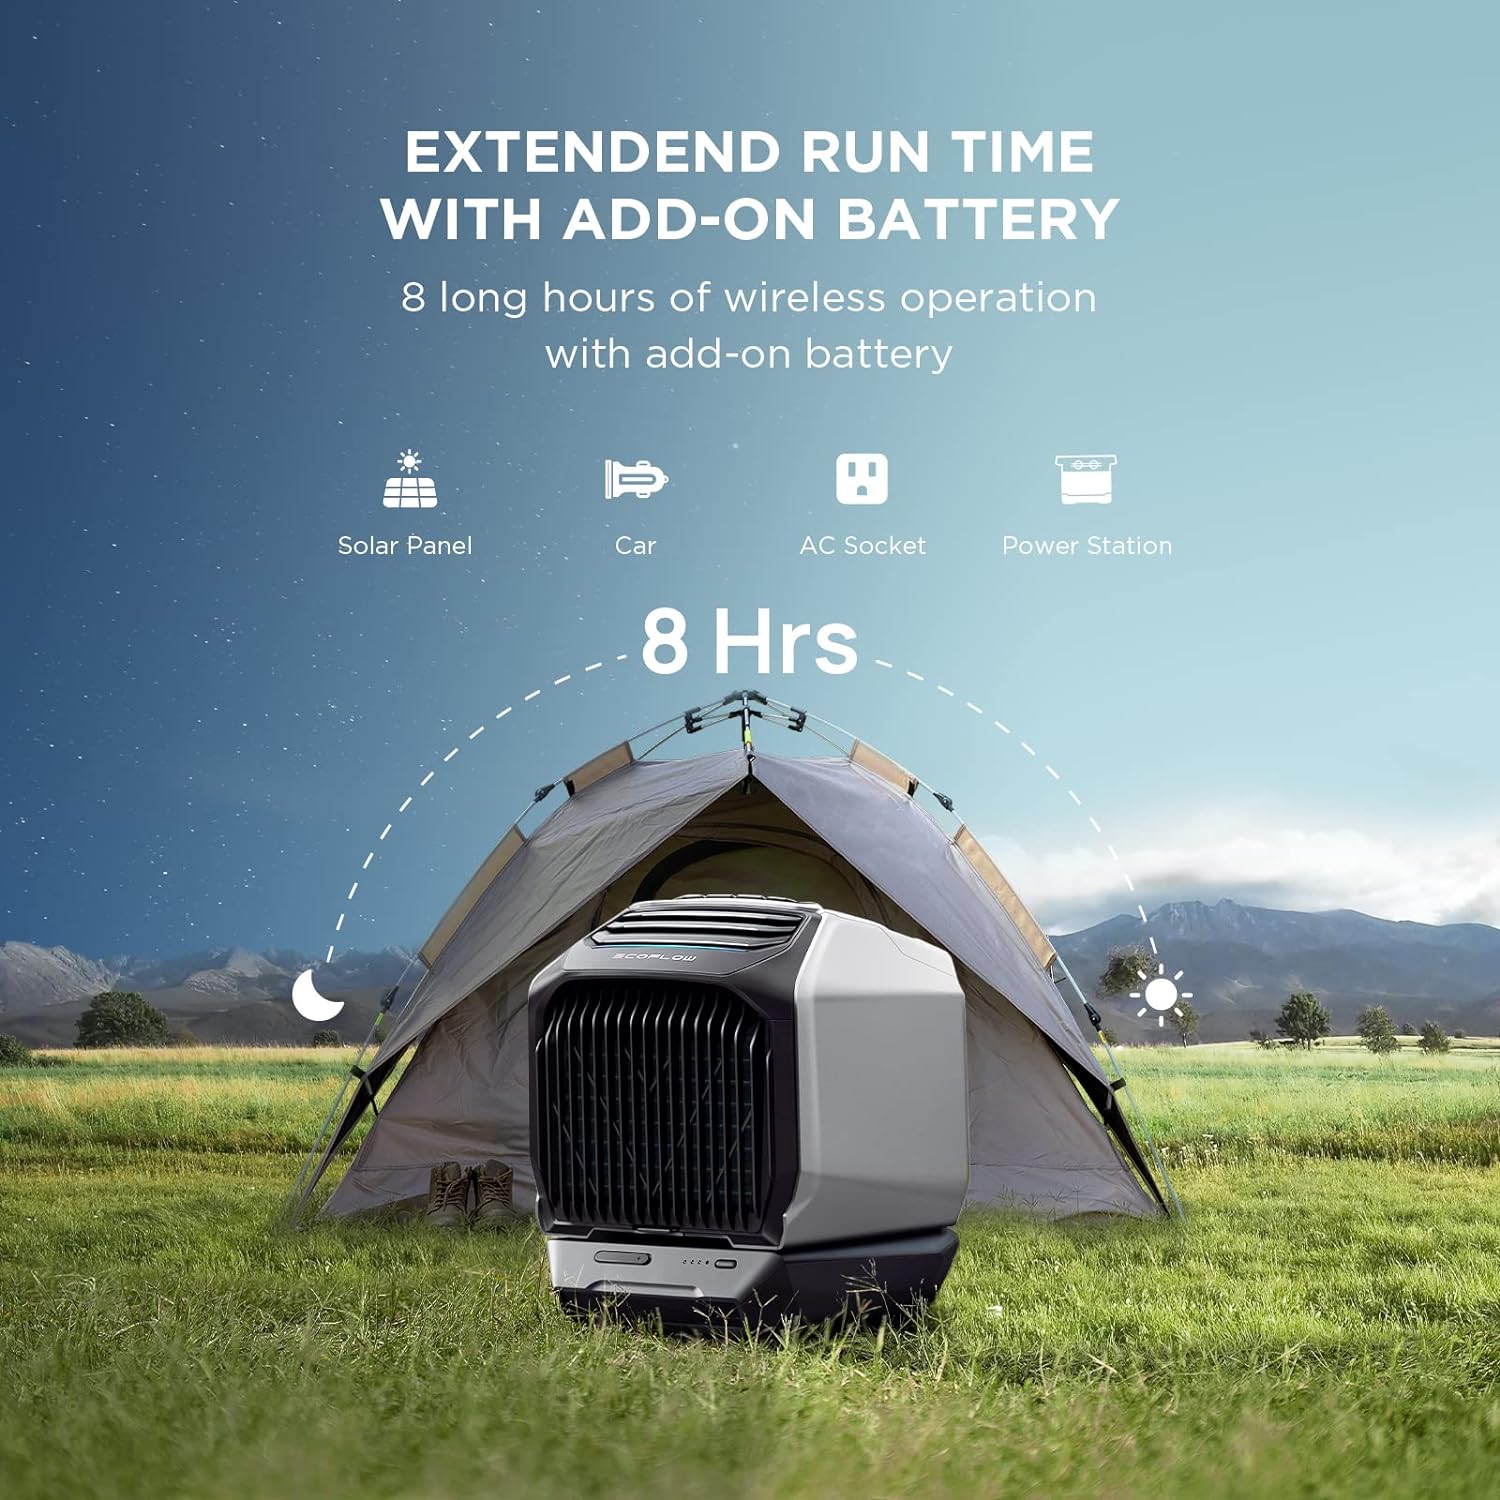 Wave 2 Portable Air Conditioner with Add-On Battery, Air Conditioning Unit with Heat, Air Portable AC for Outdoor Tent Camping/Rvs or Home Use